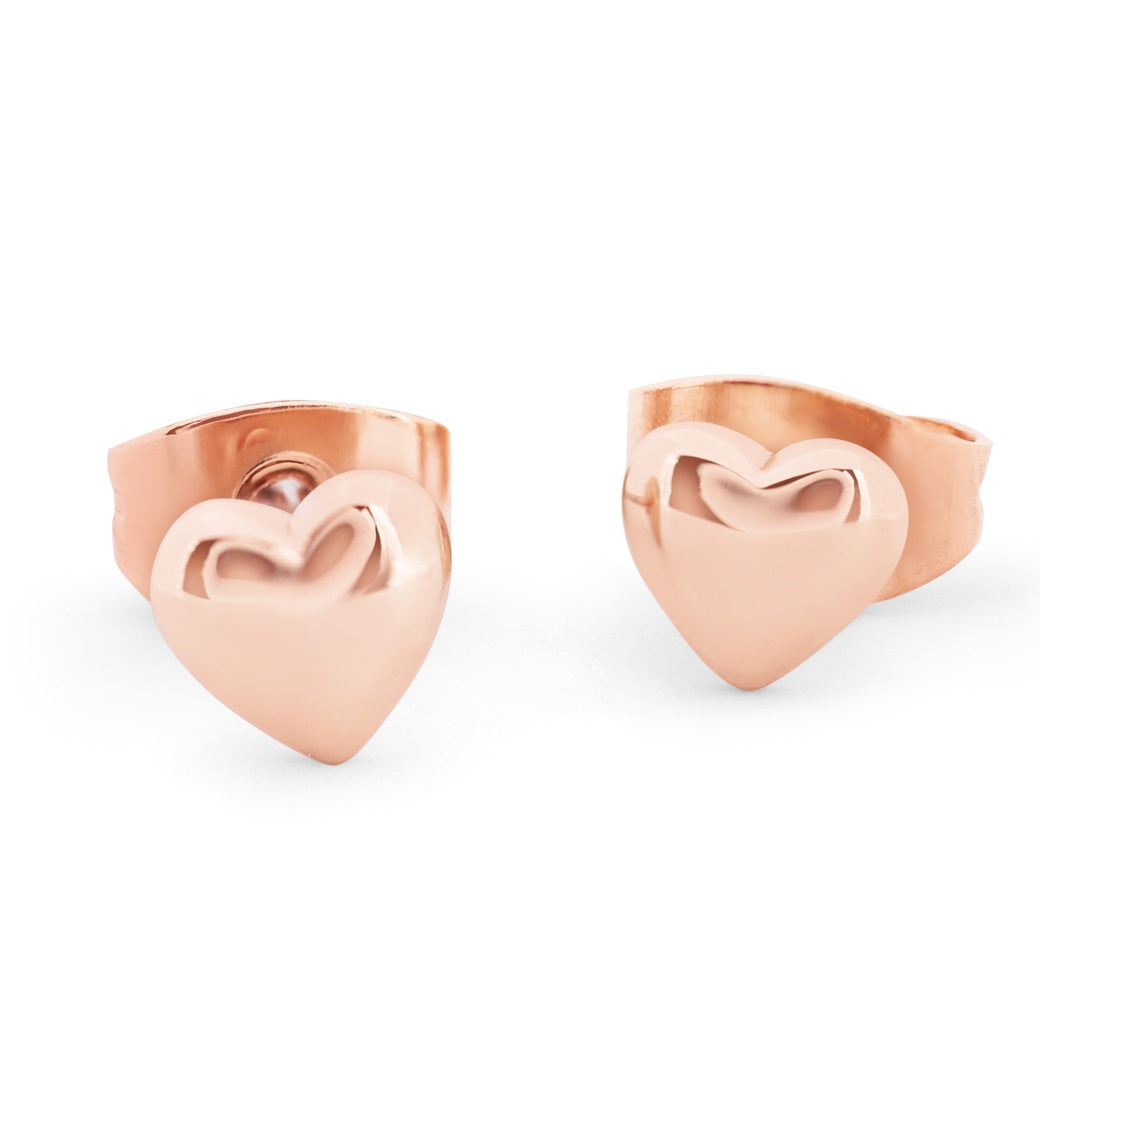 Tipperary Crystal Heart 8mm Stud Earrings - Rose Gold